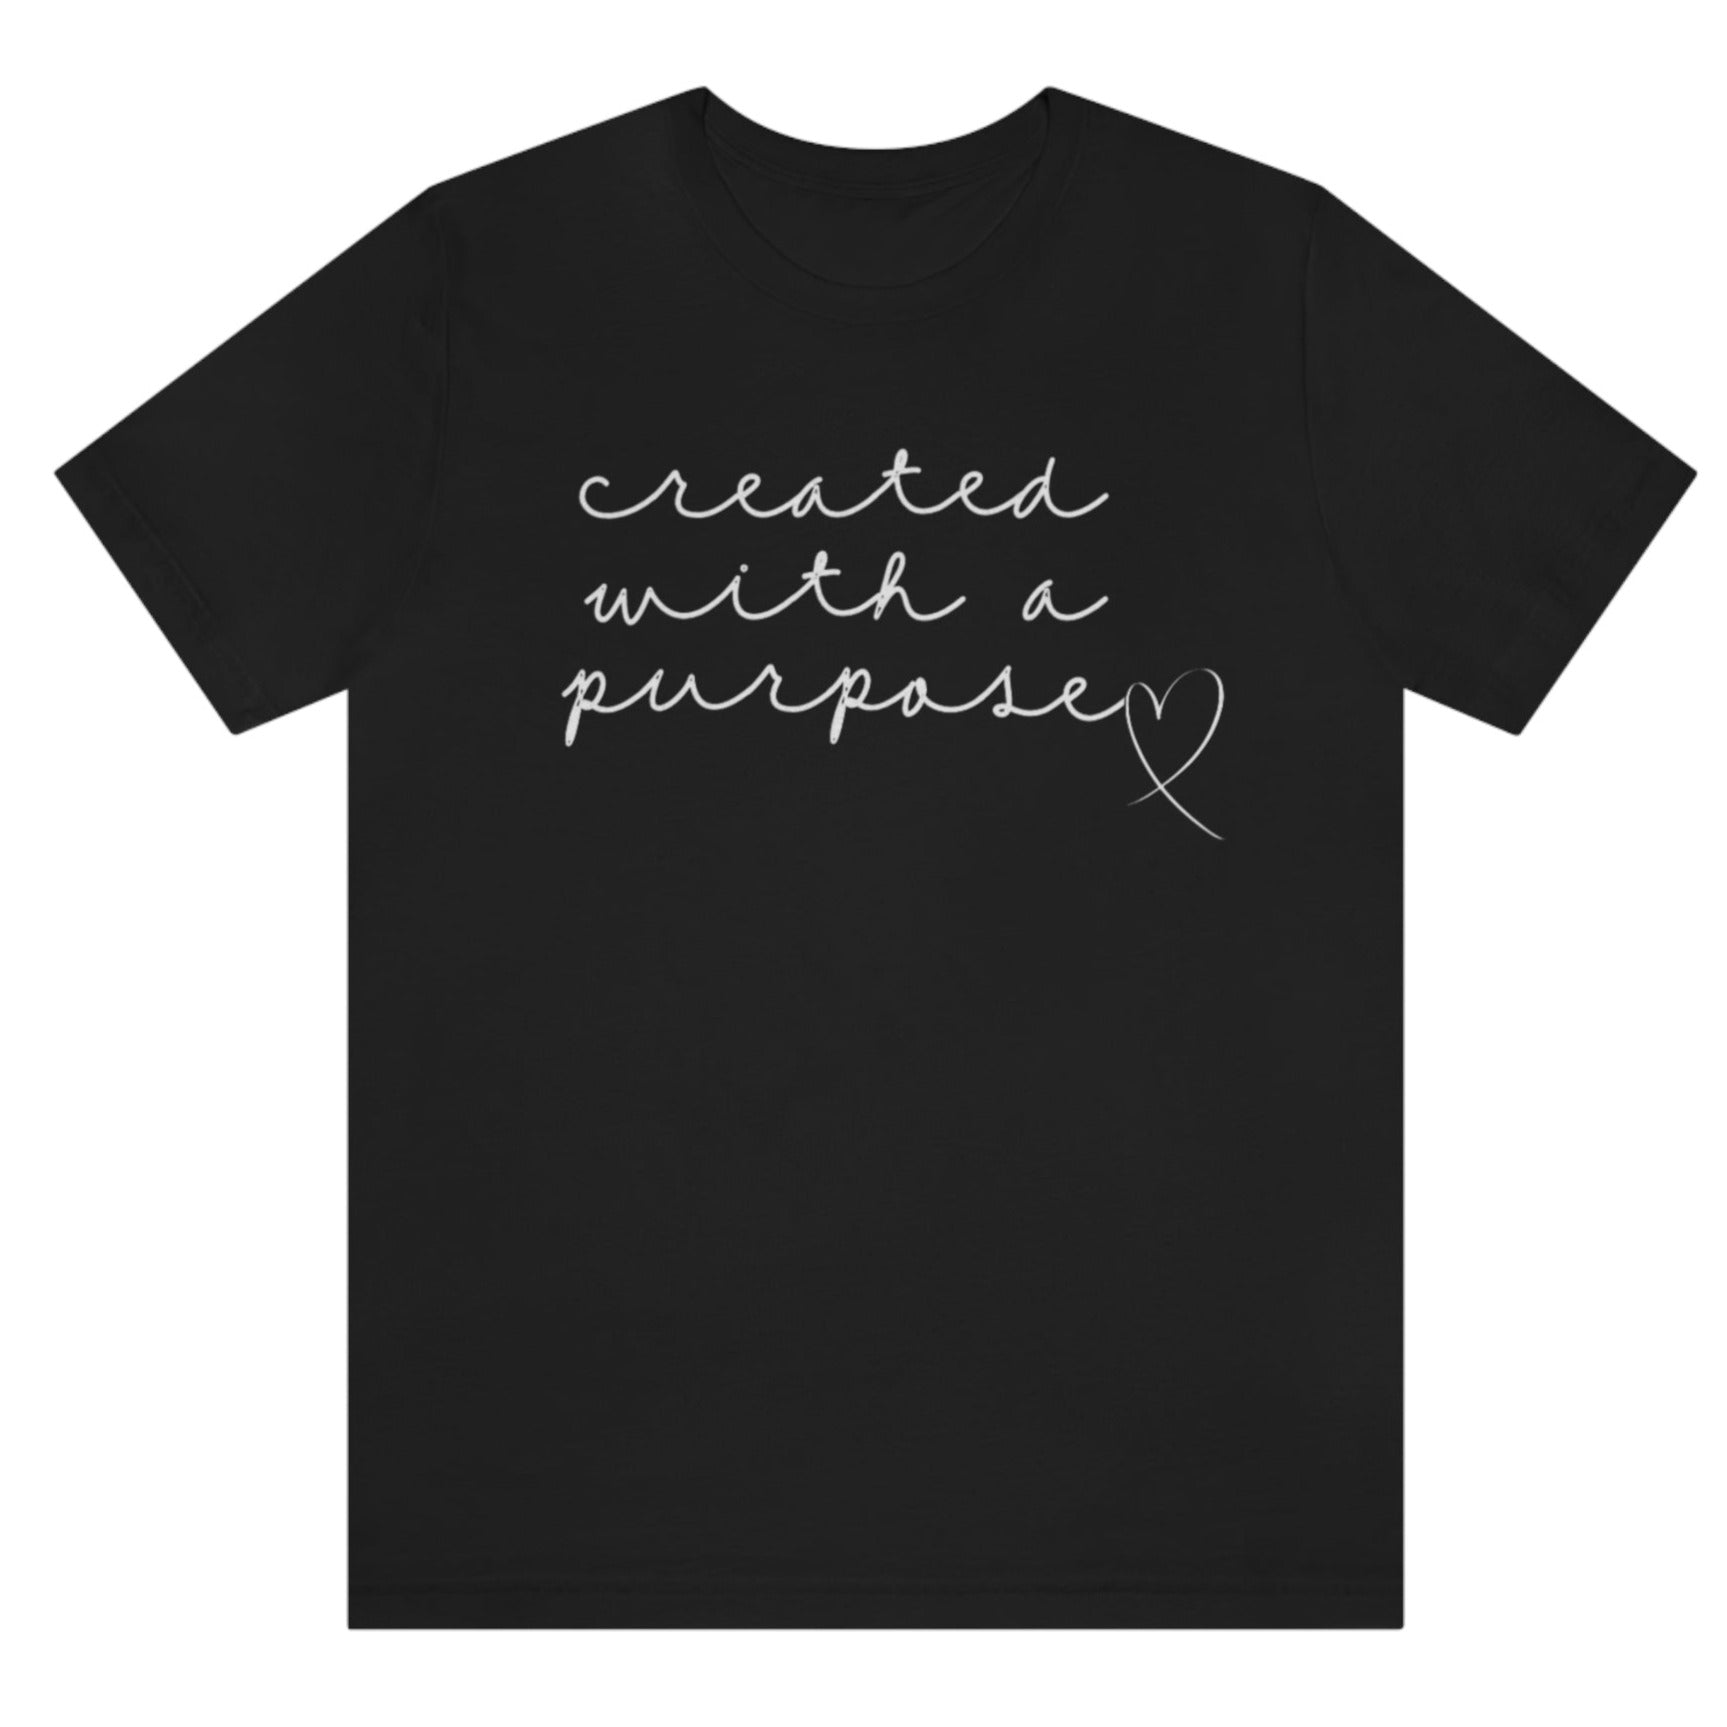 created-with-a-purpose-black-t-shirt